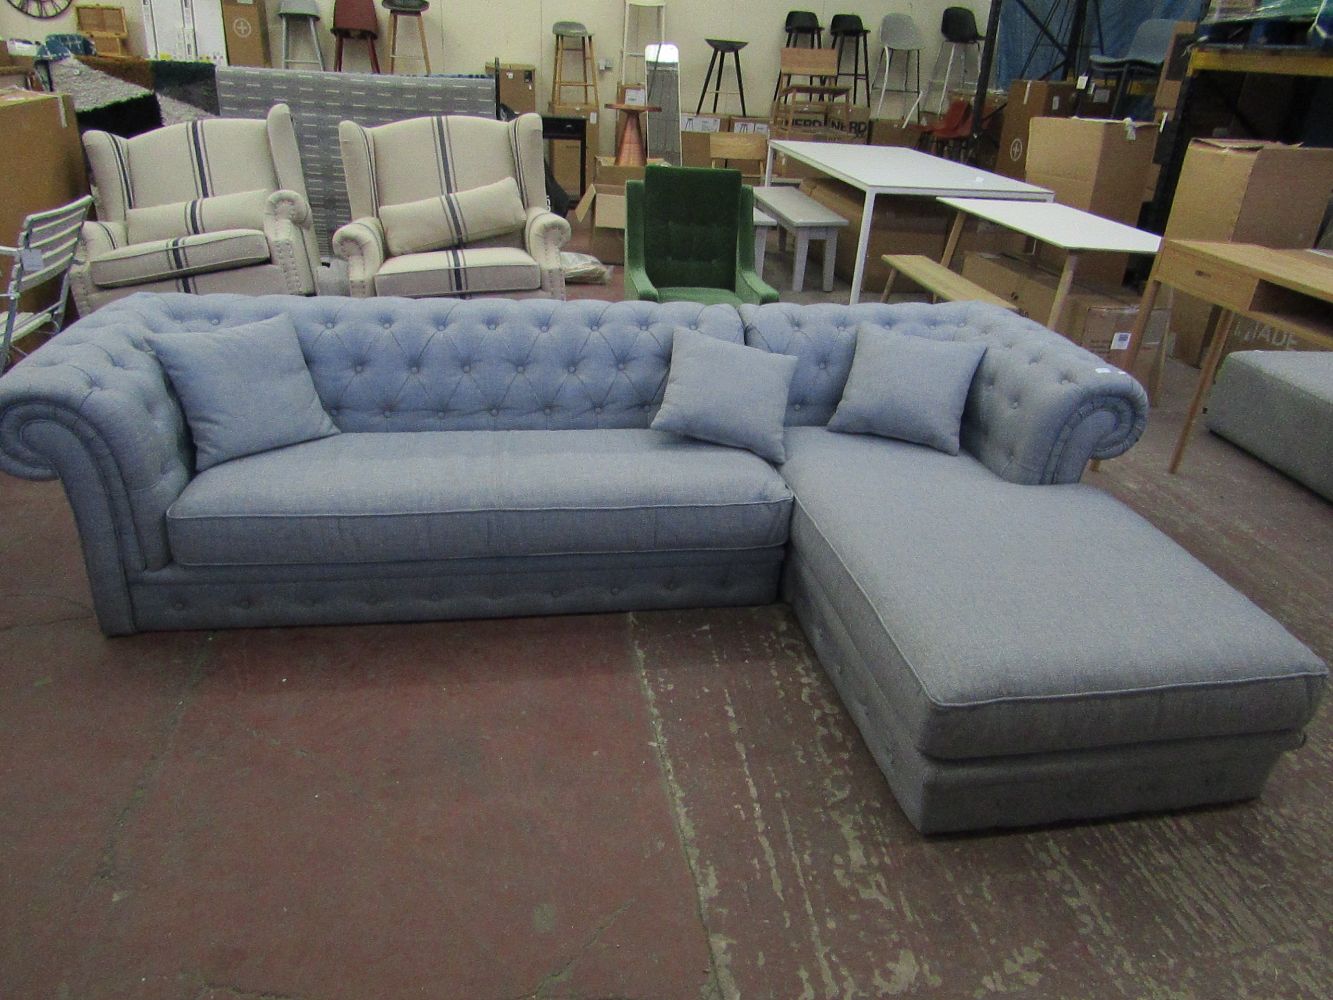 Designer furniture Auction from Swoon sofas, Costco Sofas, Hay, Normann, Gubi, Moooi, Made.com and More